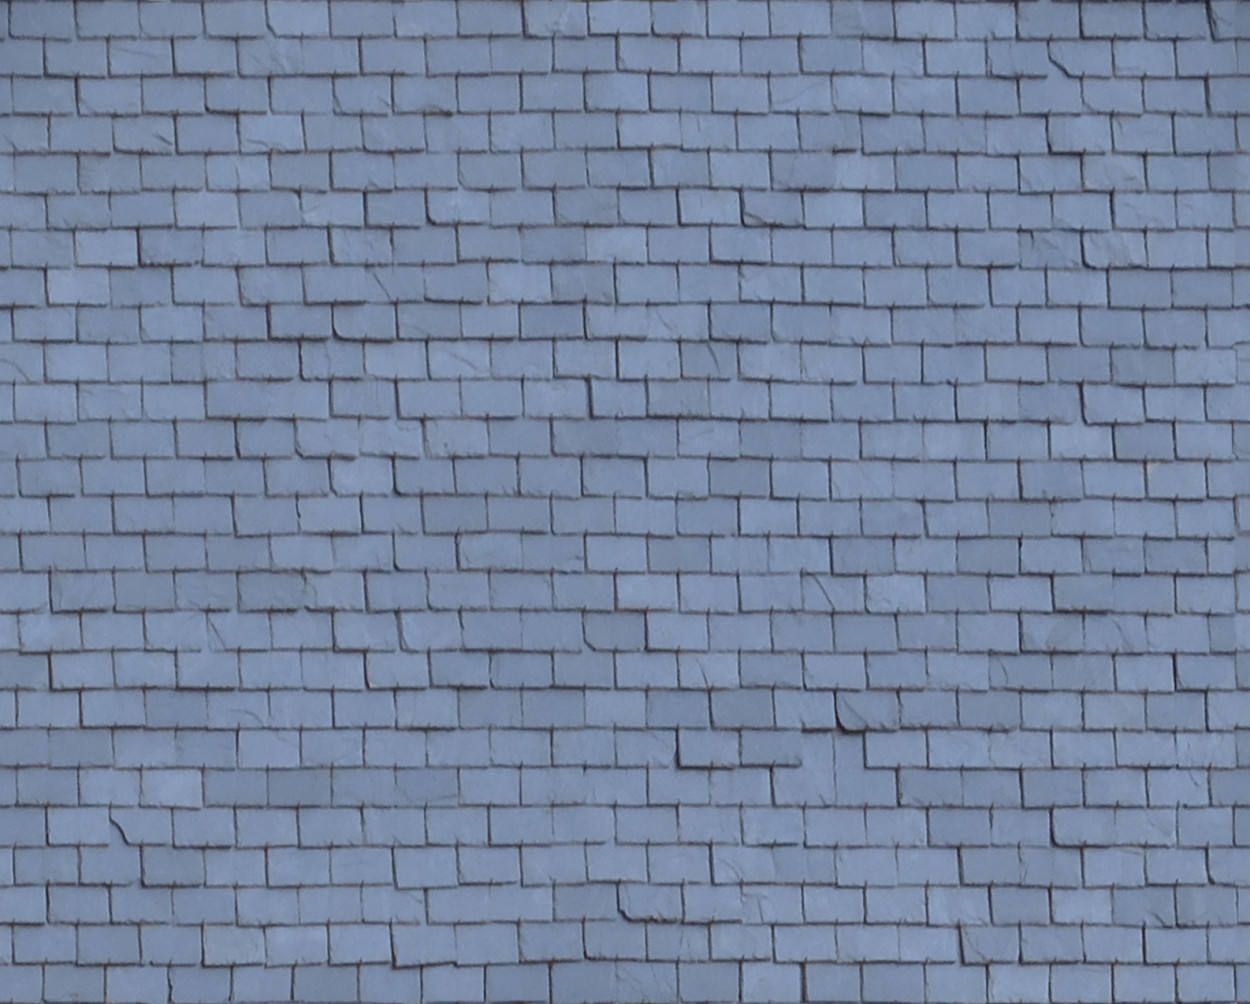 A seamless slate roof tiles texture for use in architectural drawings and 3D models